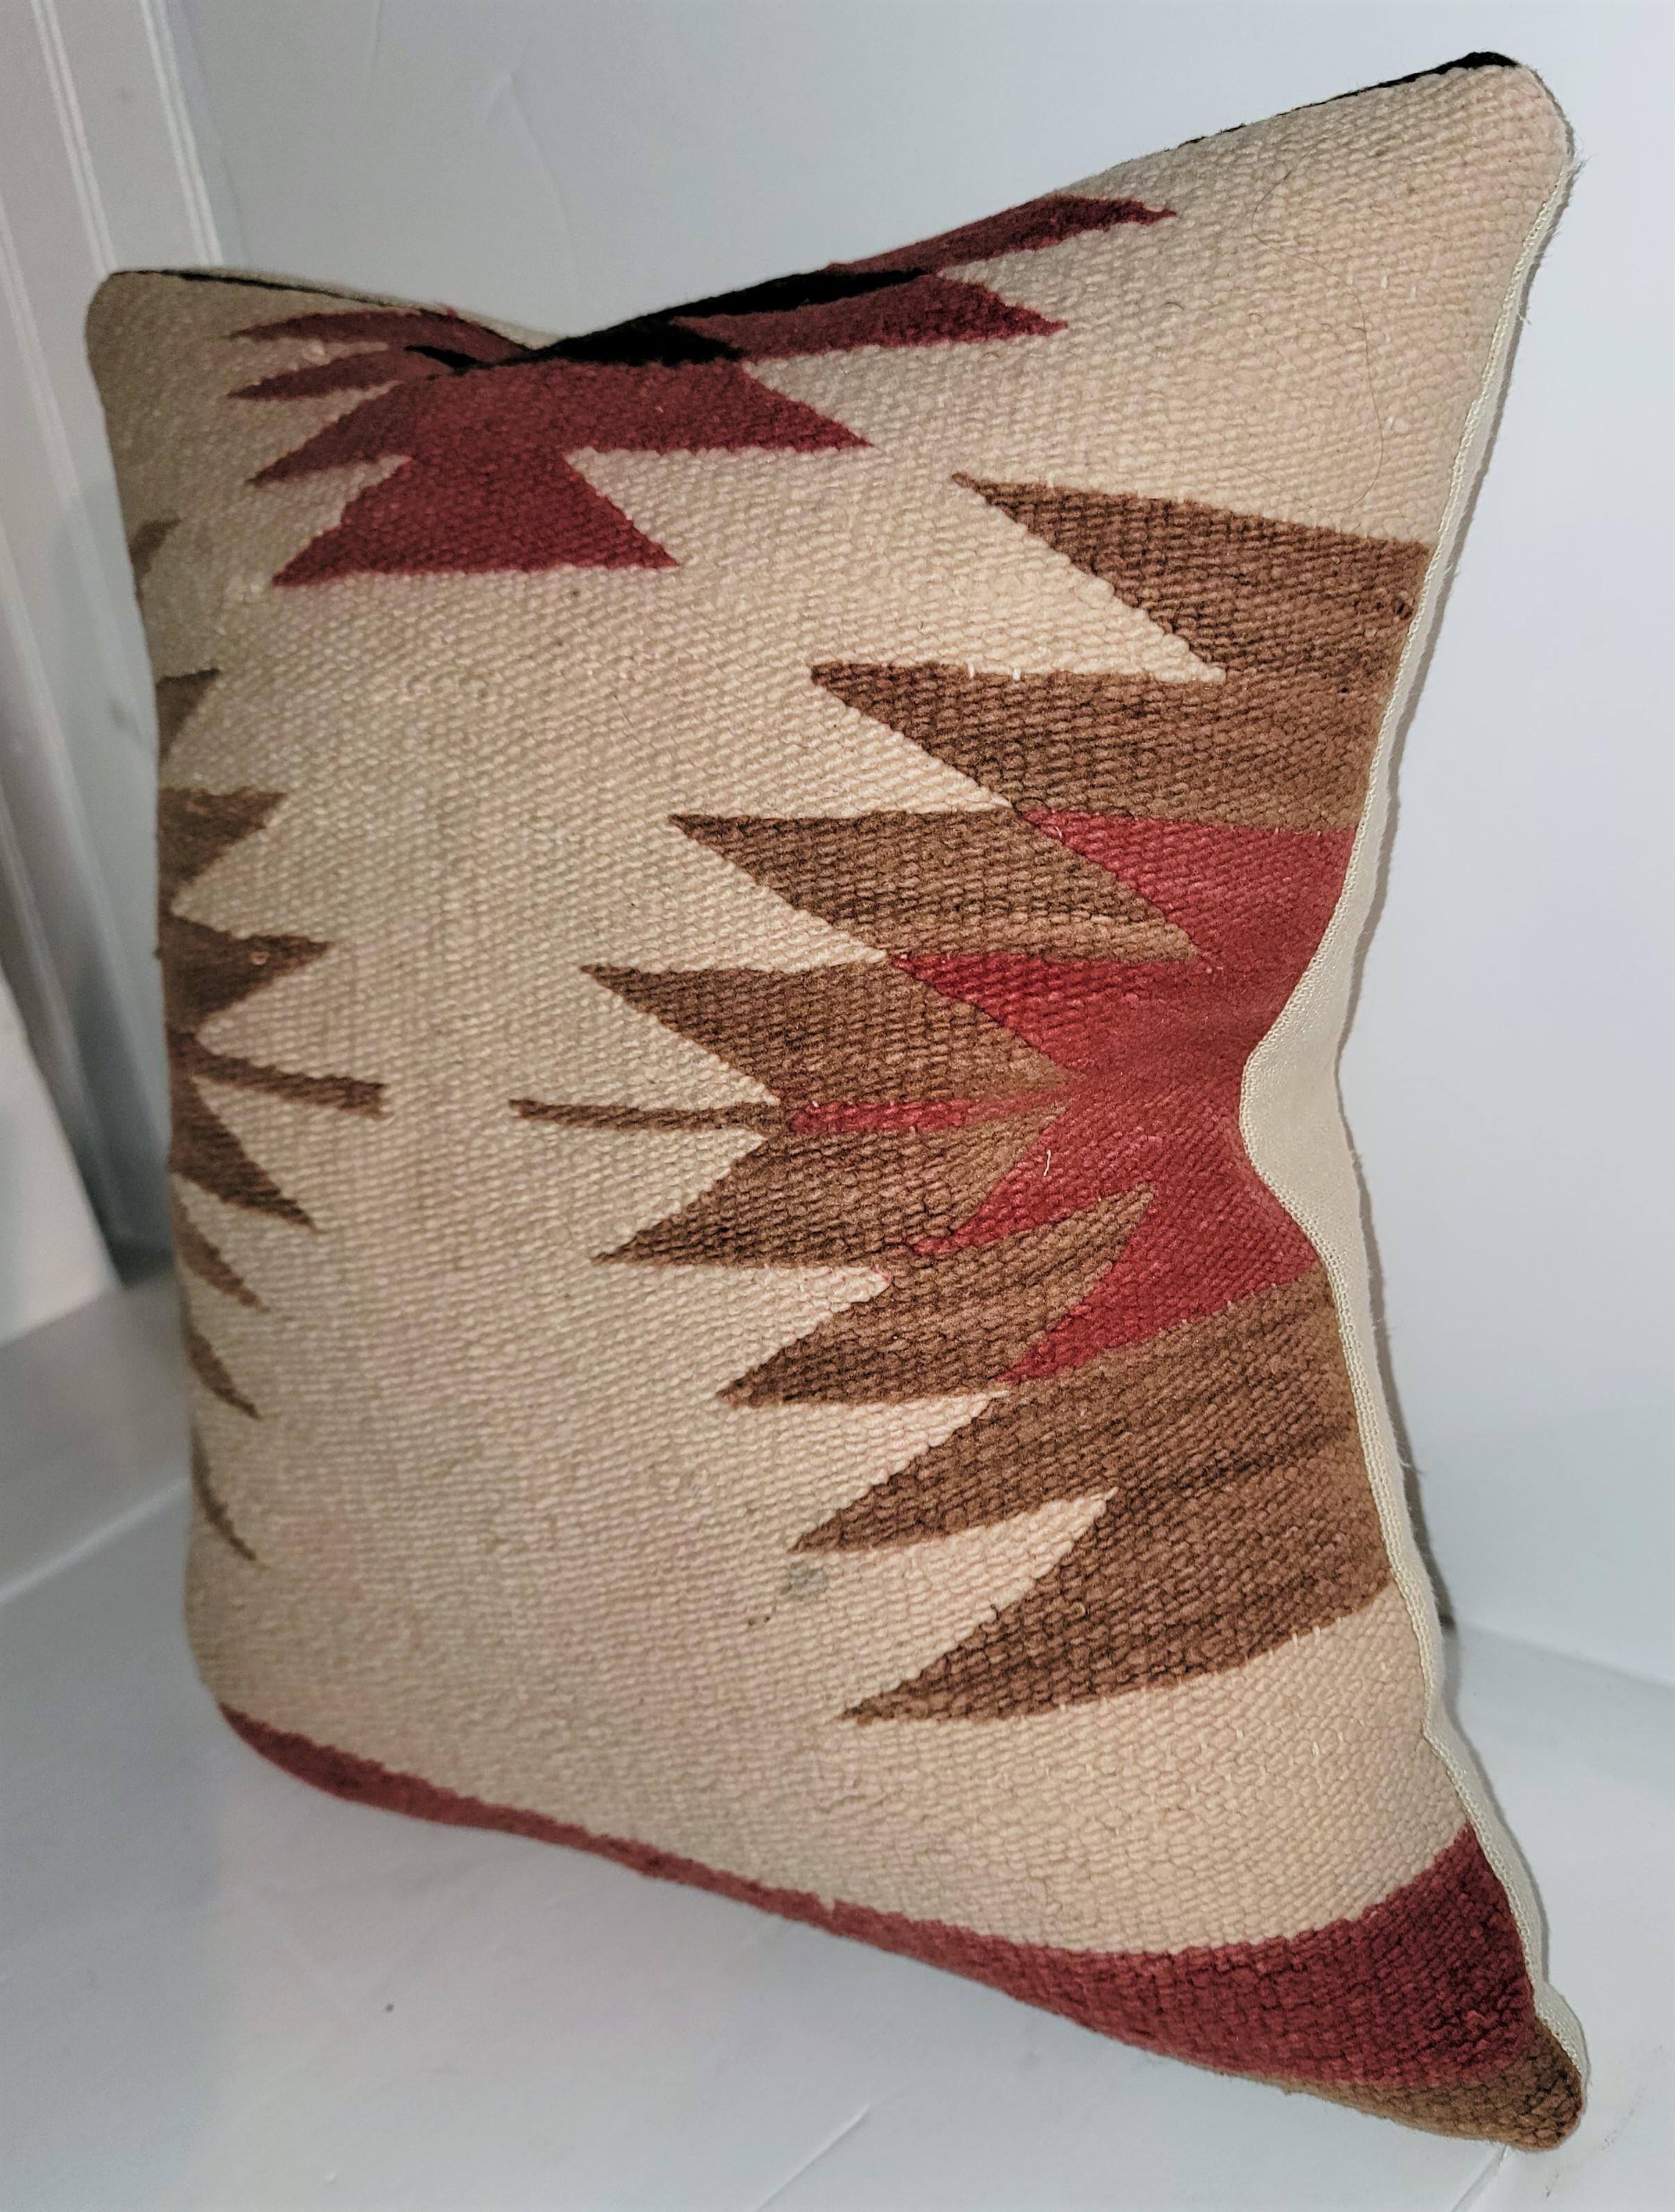 Navajo eye dazzler Indian weaving pillow. Feather and down insert and zippered insert.